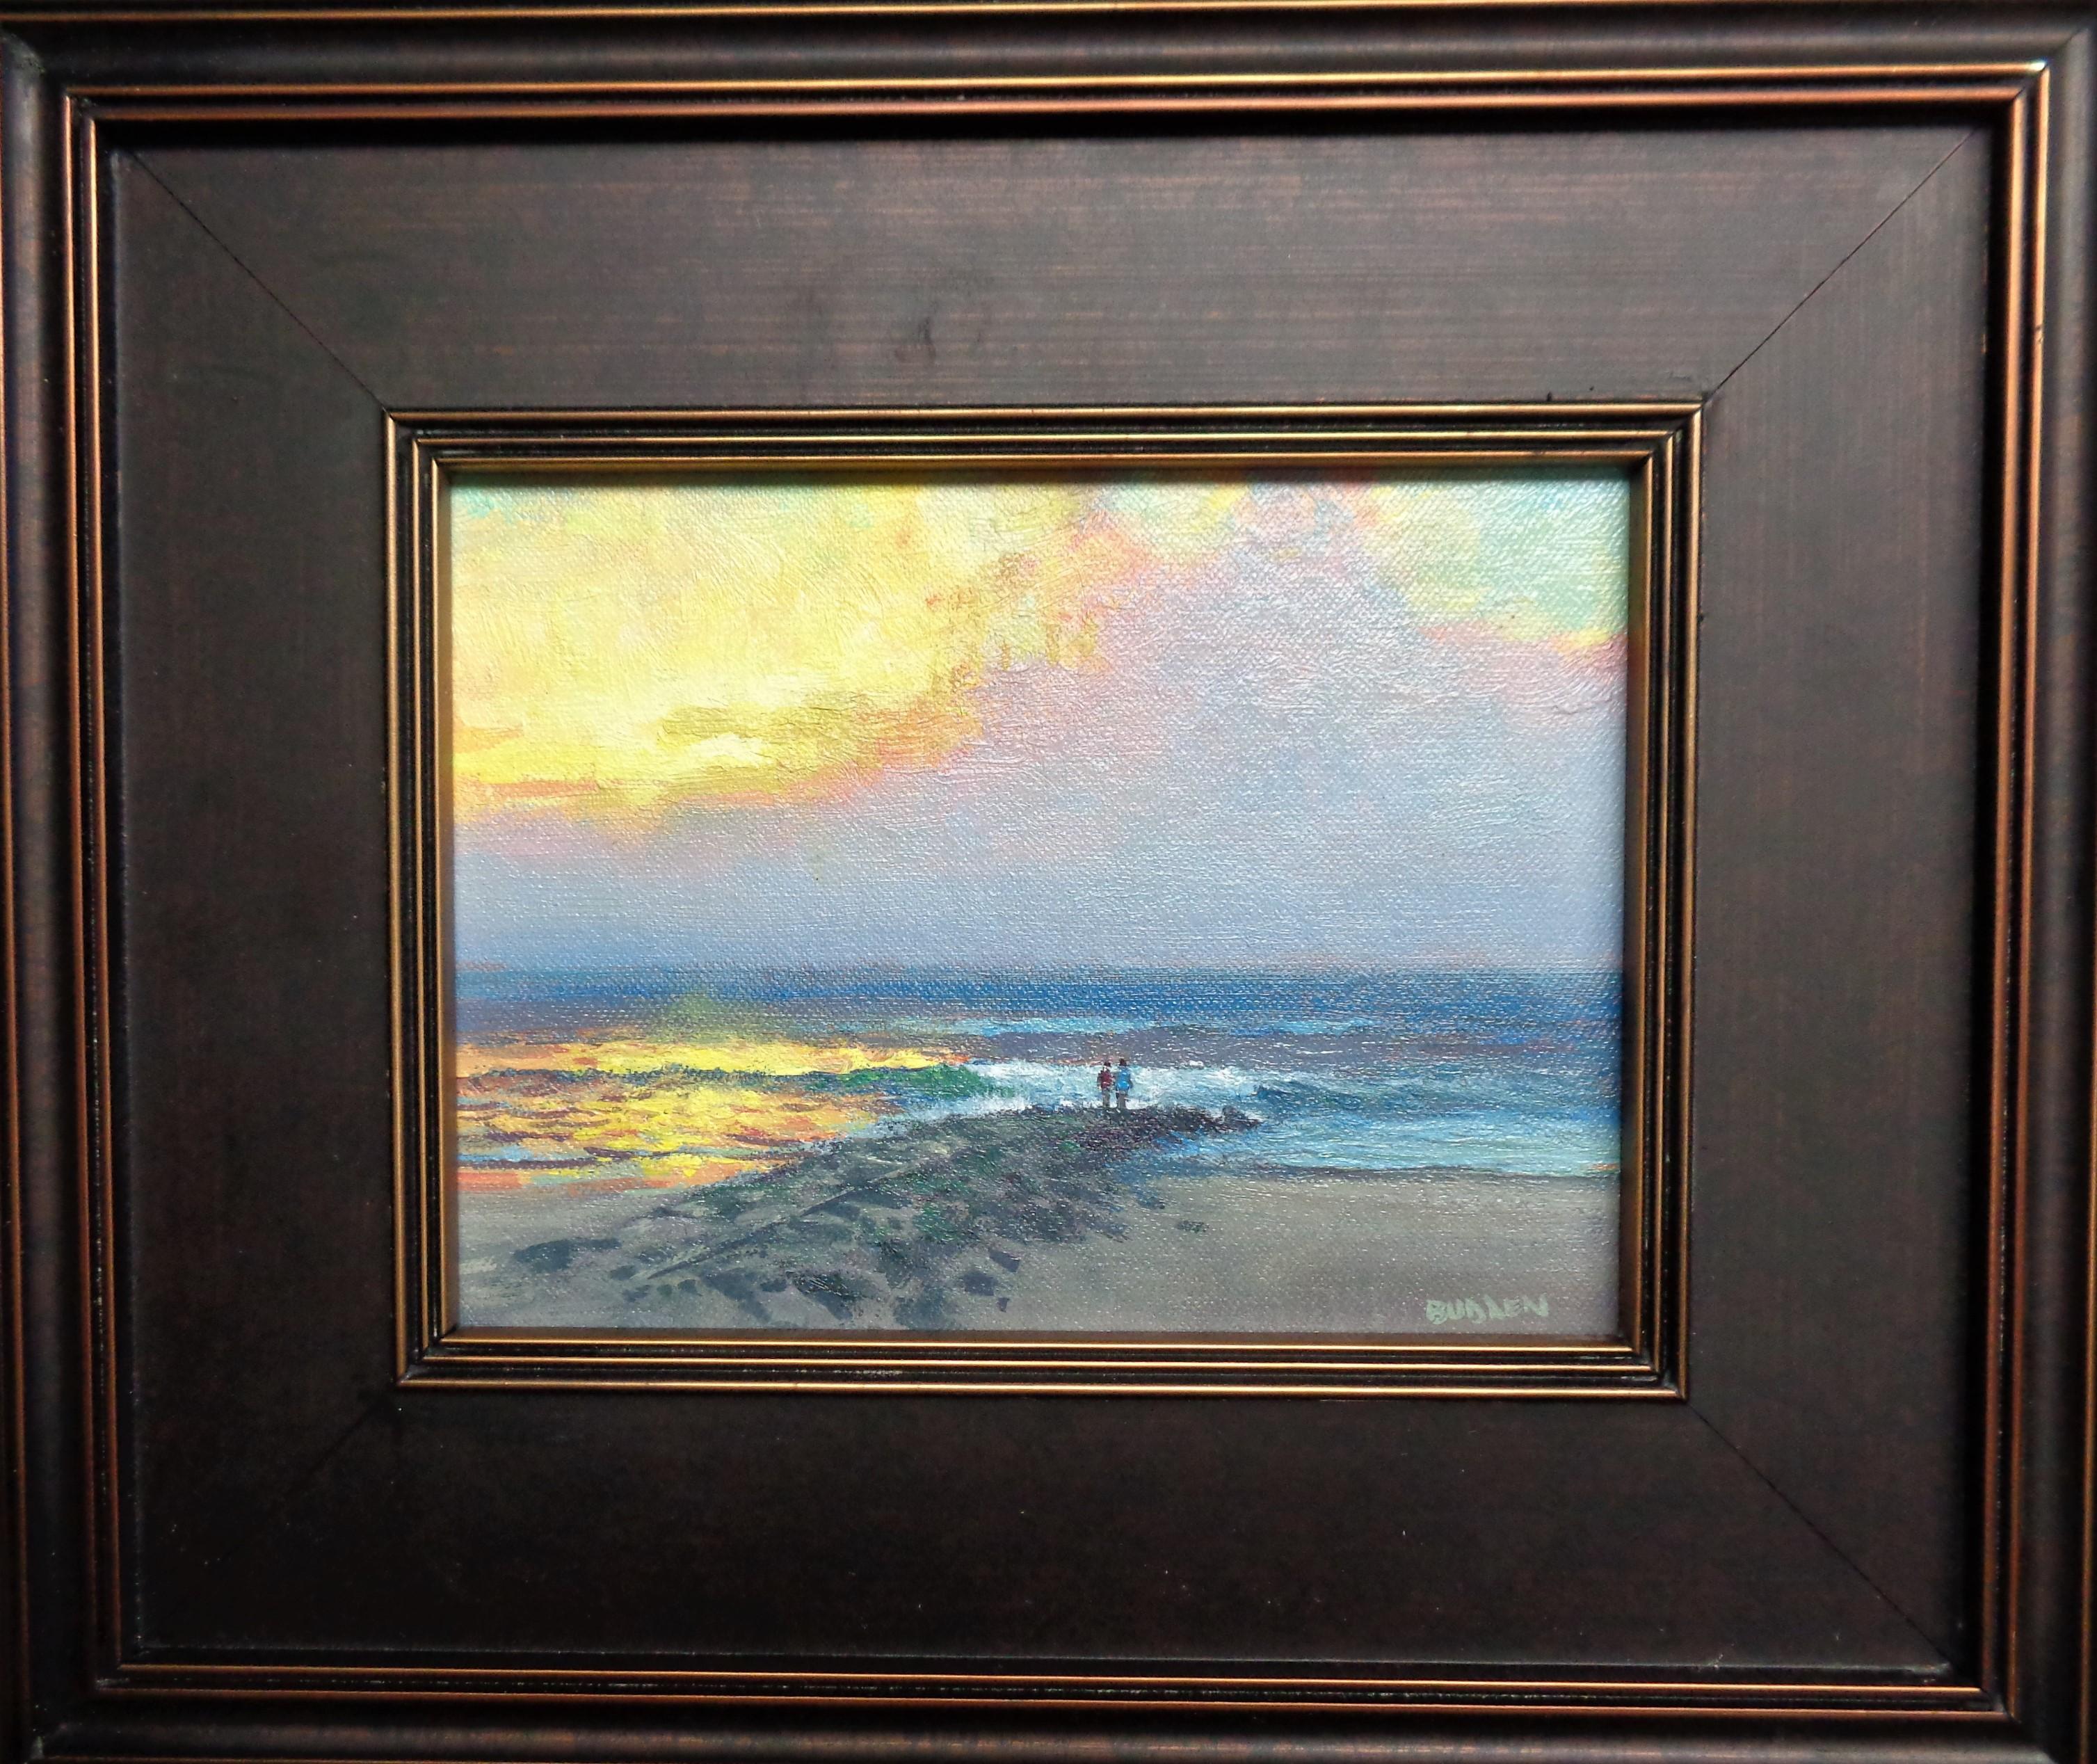 An study oil painting on canvas by award winning contemporary artist Michael Budden that showcases a unique composition of  a sunrise on the beach created in an impressionistic realism style. The painting exudes the very rich qualities of color, and